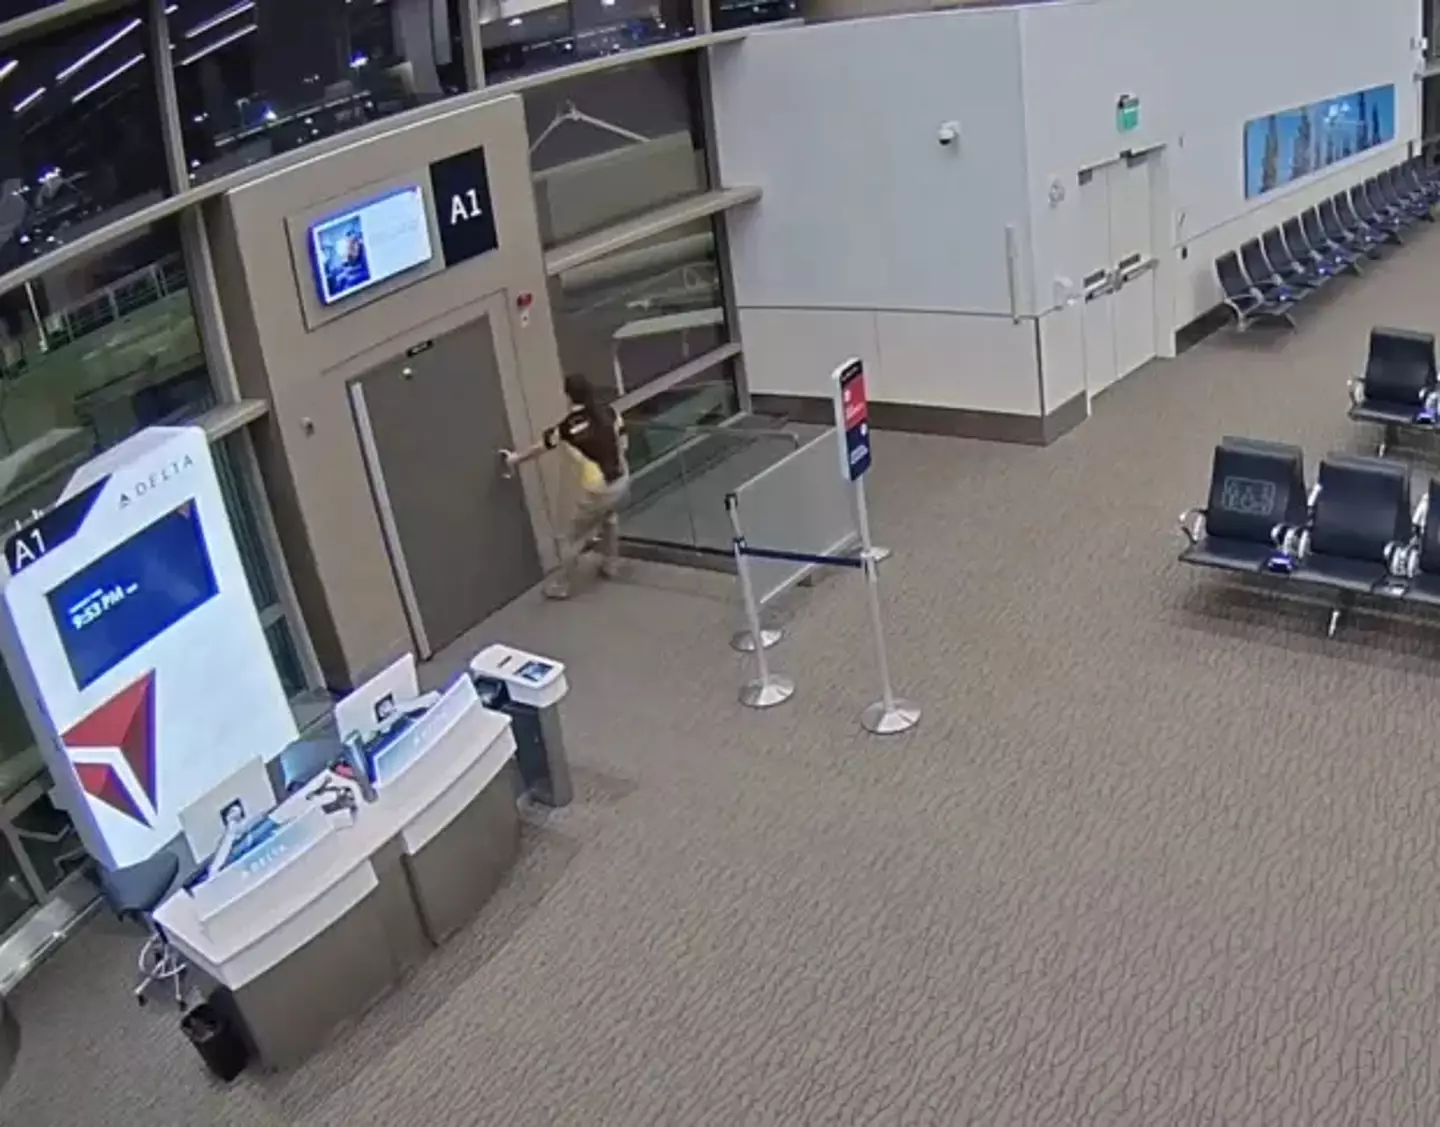 The footage shows him making his way through the airport.